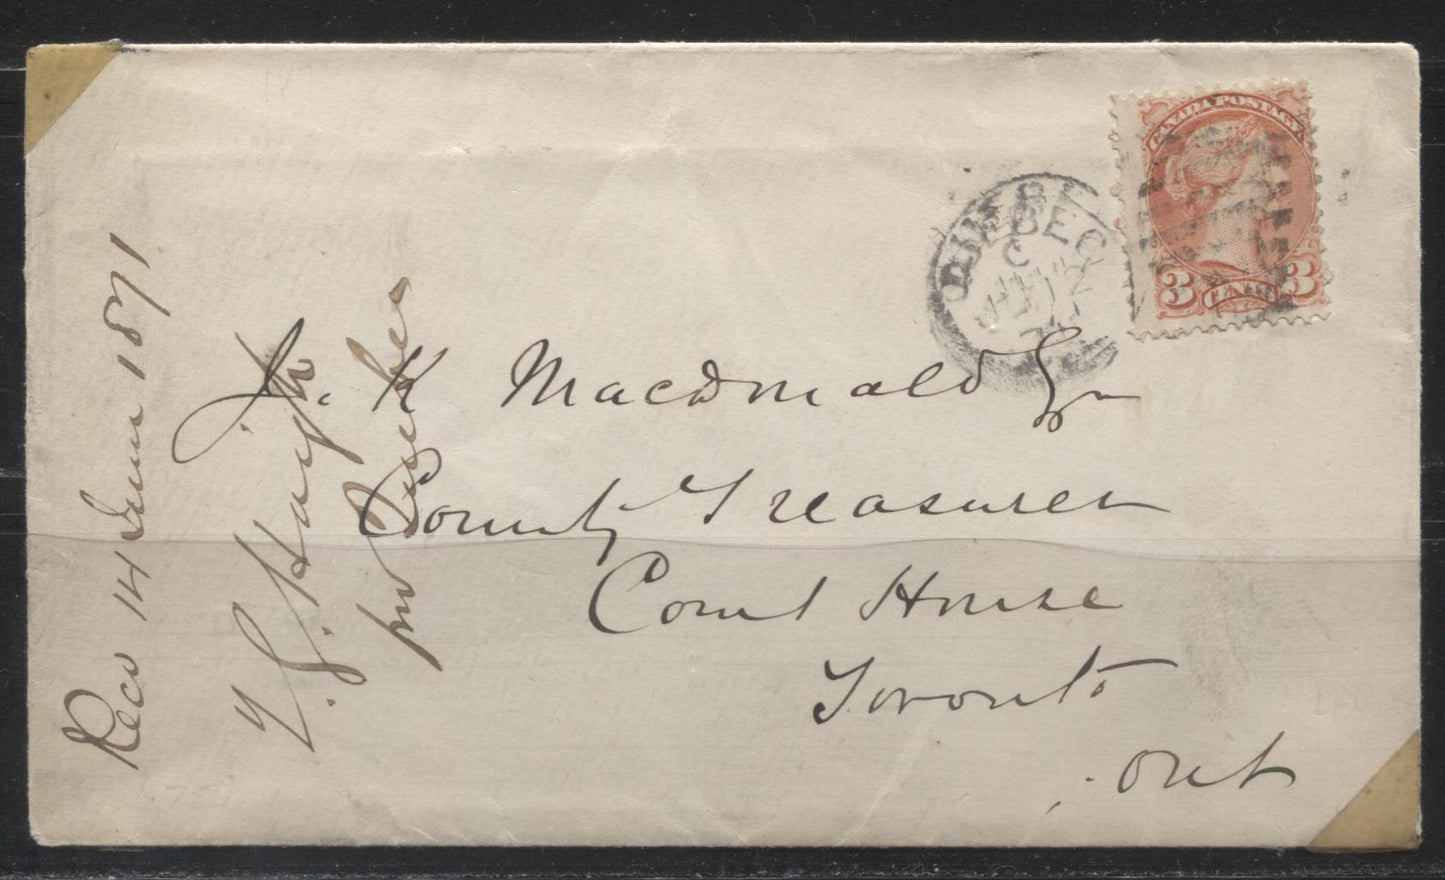 Lot 219 Canada #37a 3c  Queen Victoria, 1870-1897 Small Queen Issue, A Fine Domestic Cover Franked With the 3c Rose First Ottawa Printing